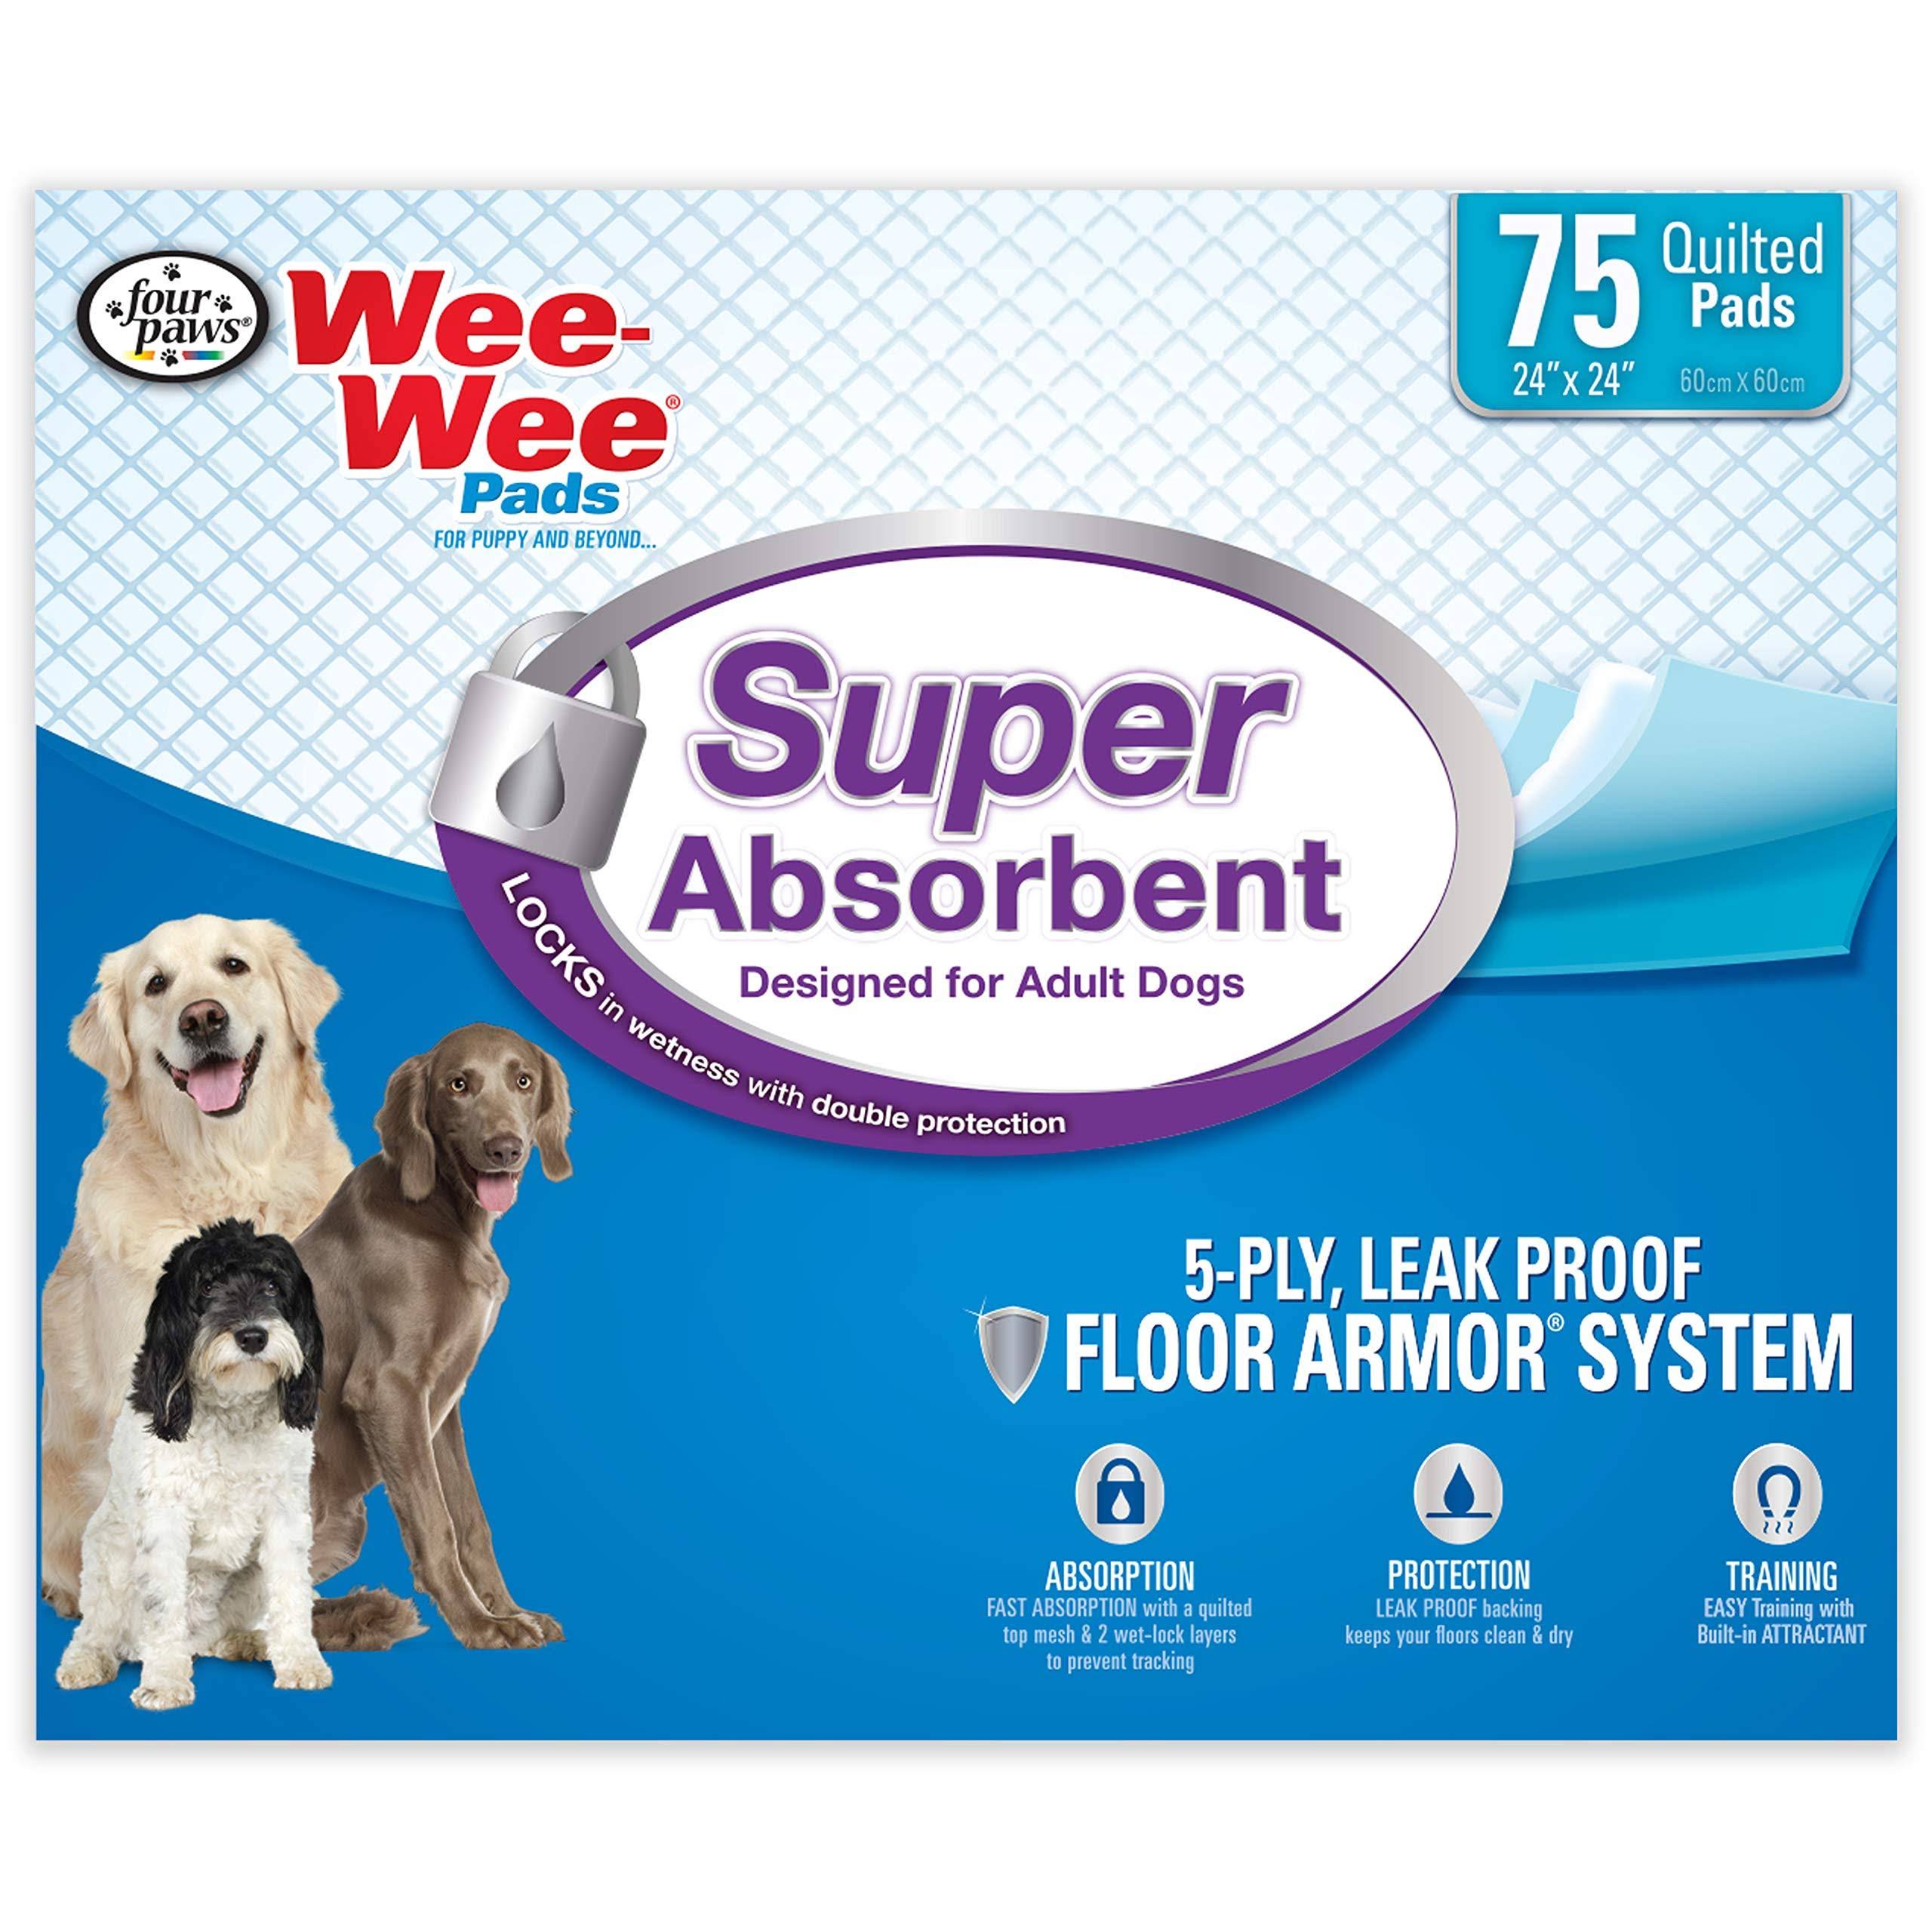 Four Paws Super Absorbent Wee-wee Dog Pads - 75ct